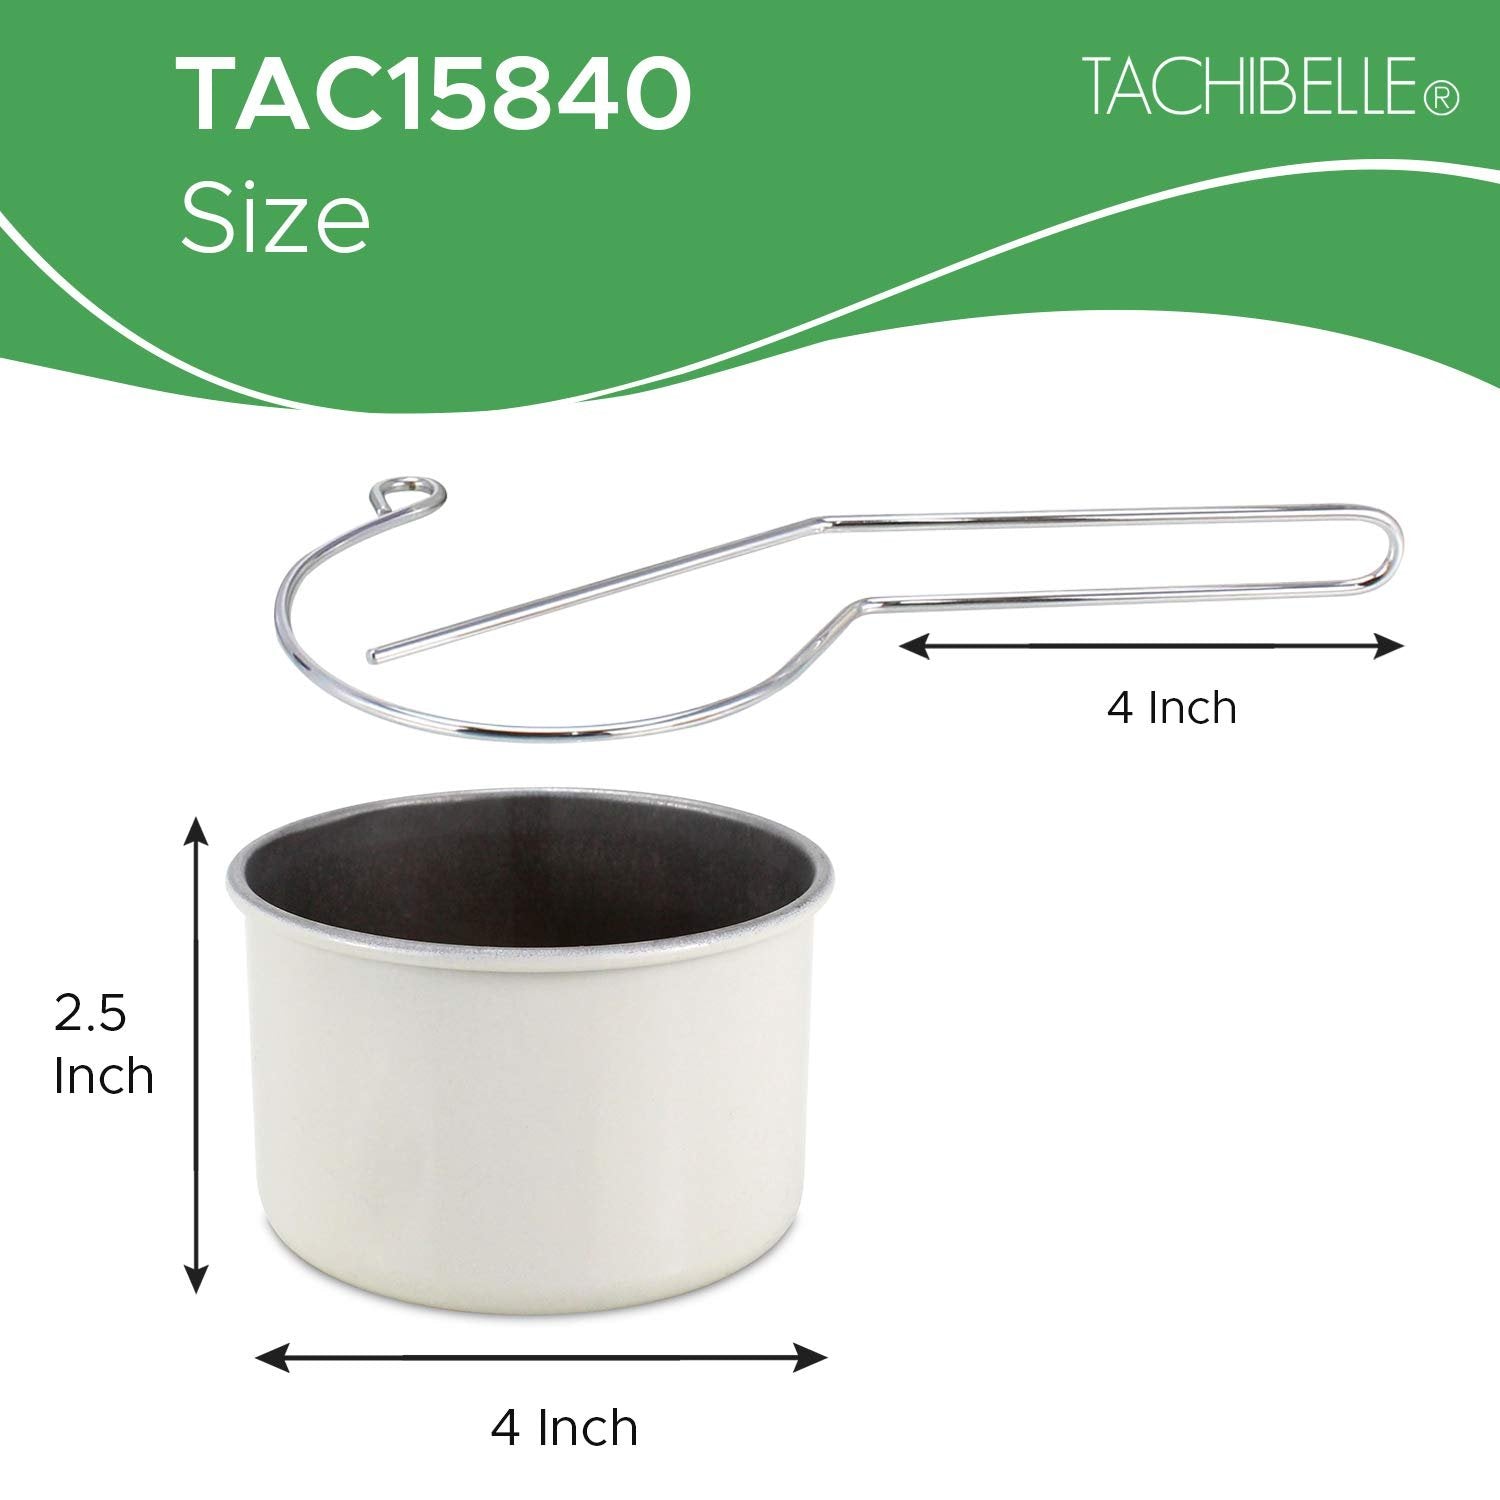 Tachibelle WAX CAN with SCRAPER HANDLE IN ONE BOX